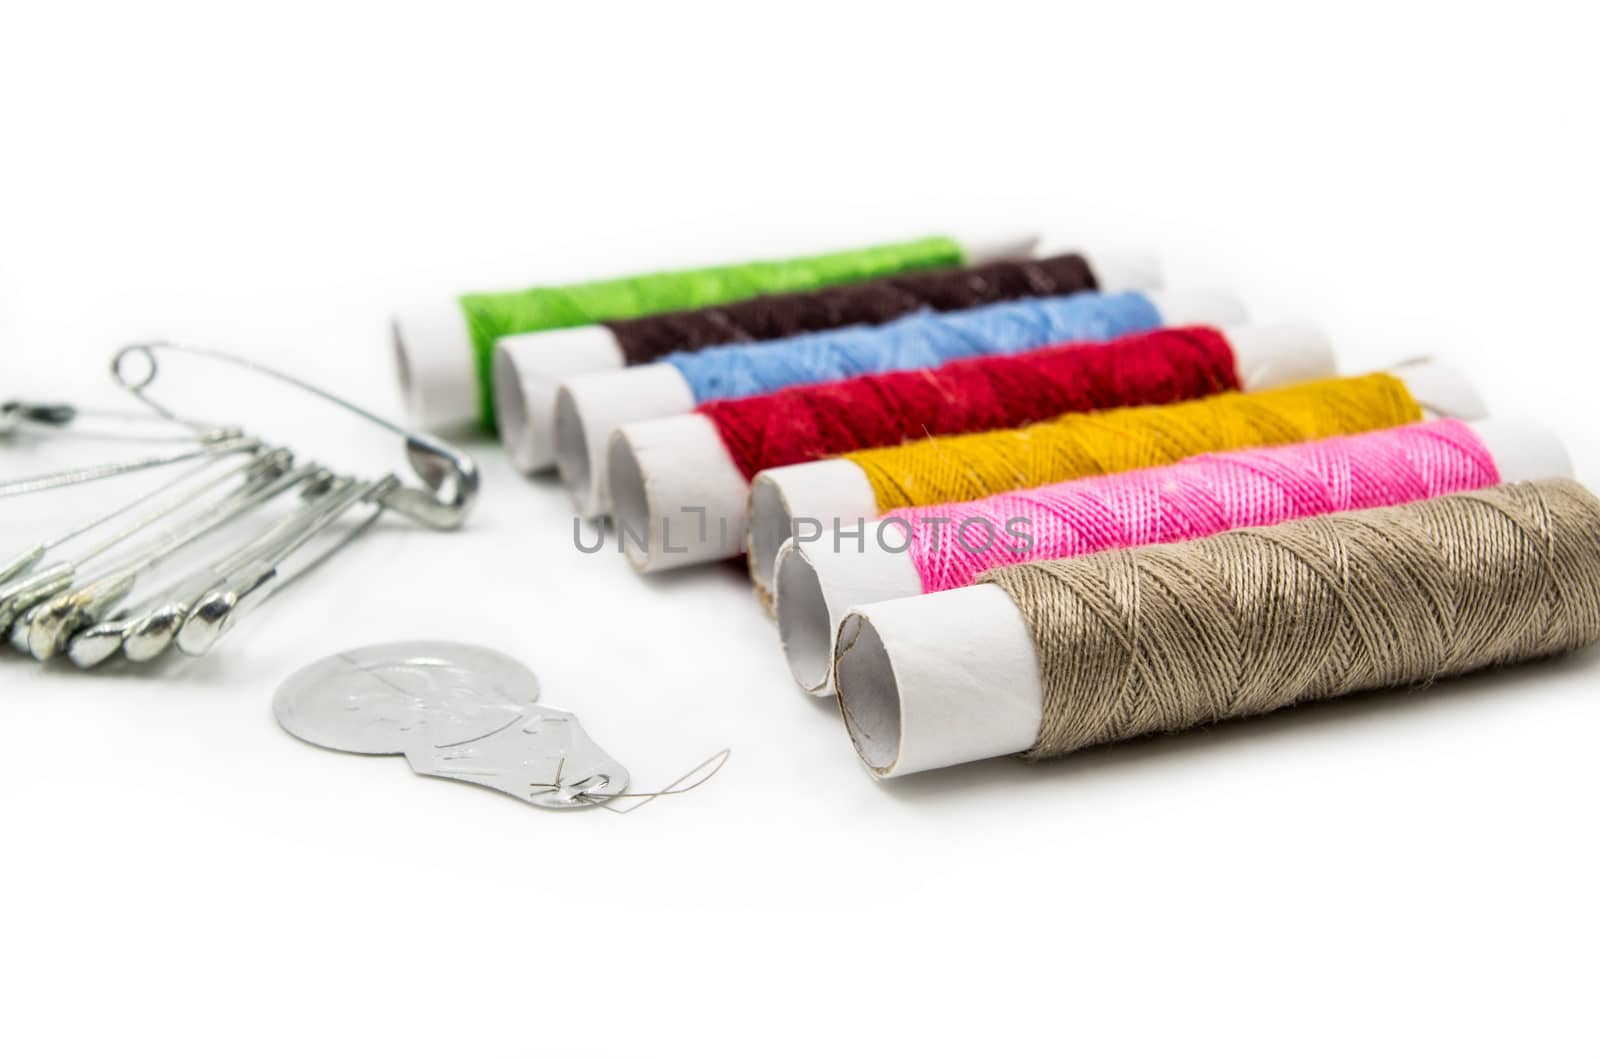 sewing tools on white background by Desperada